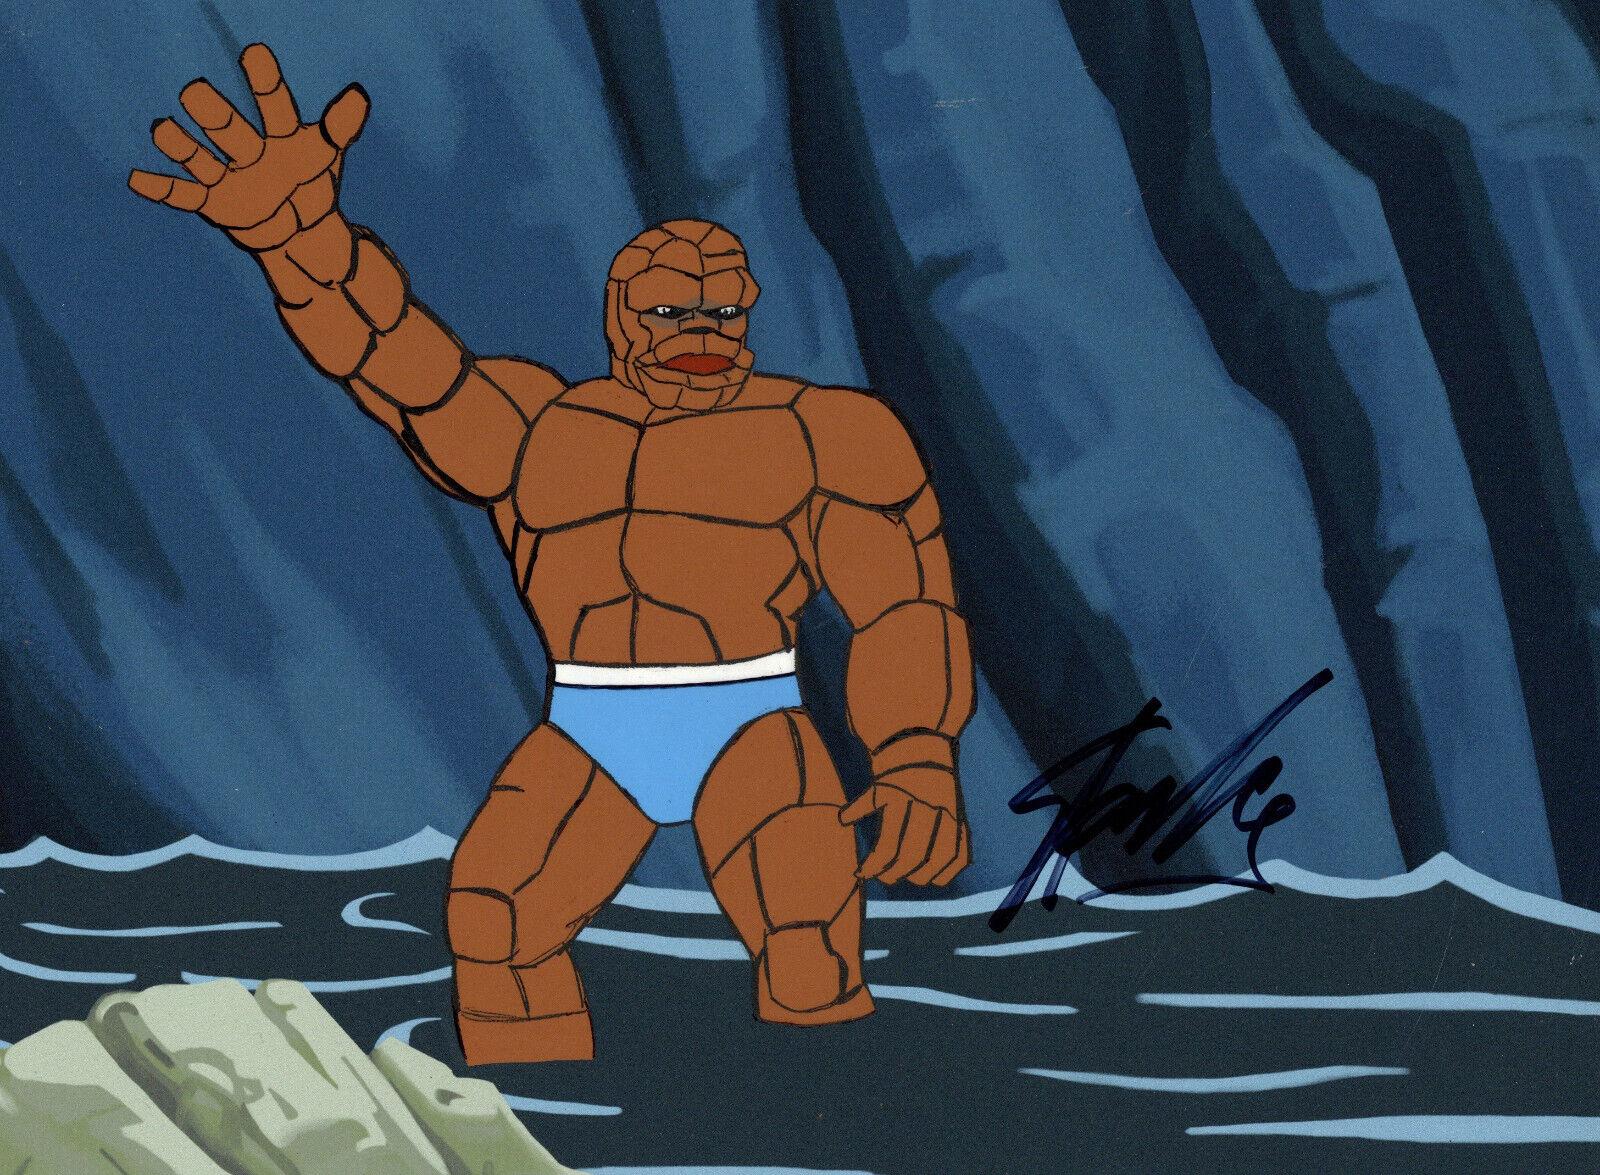 Up for sale from the series is an original production cel on printed background with matching original production drawing featuring The Thing Series from 1979 created by Hanna Barbera. Both the cel and drawing come hand signed by Stan Lee, un-framed